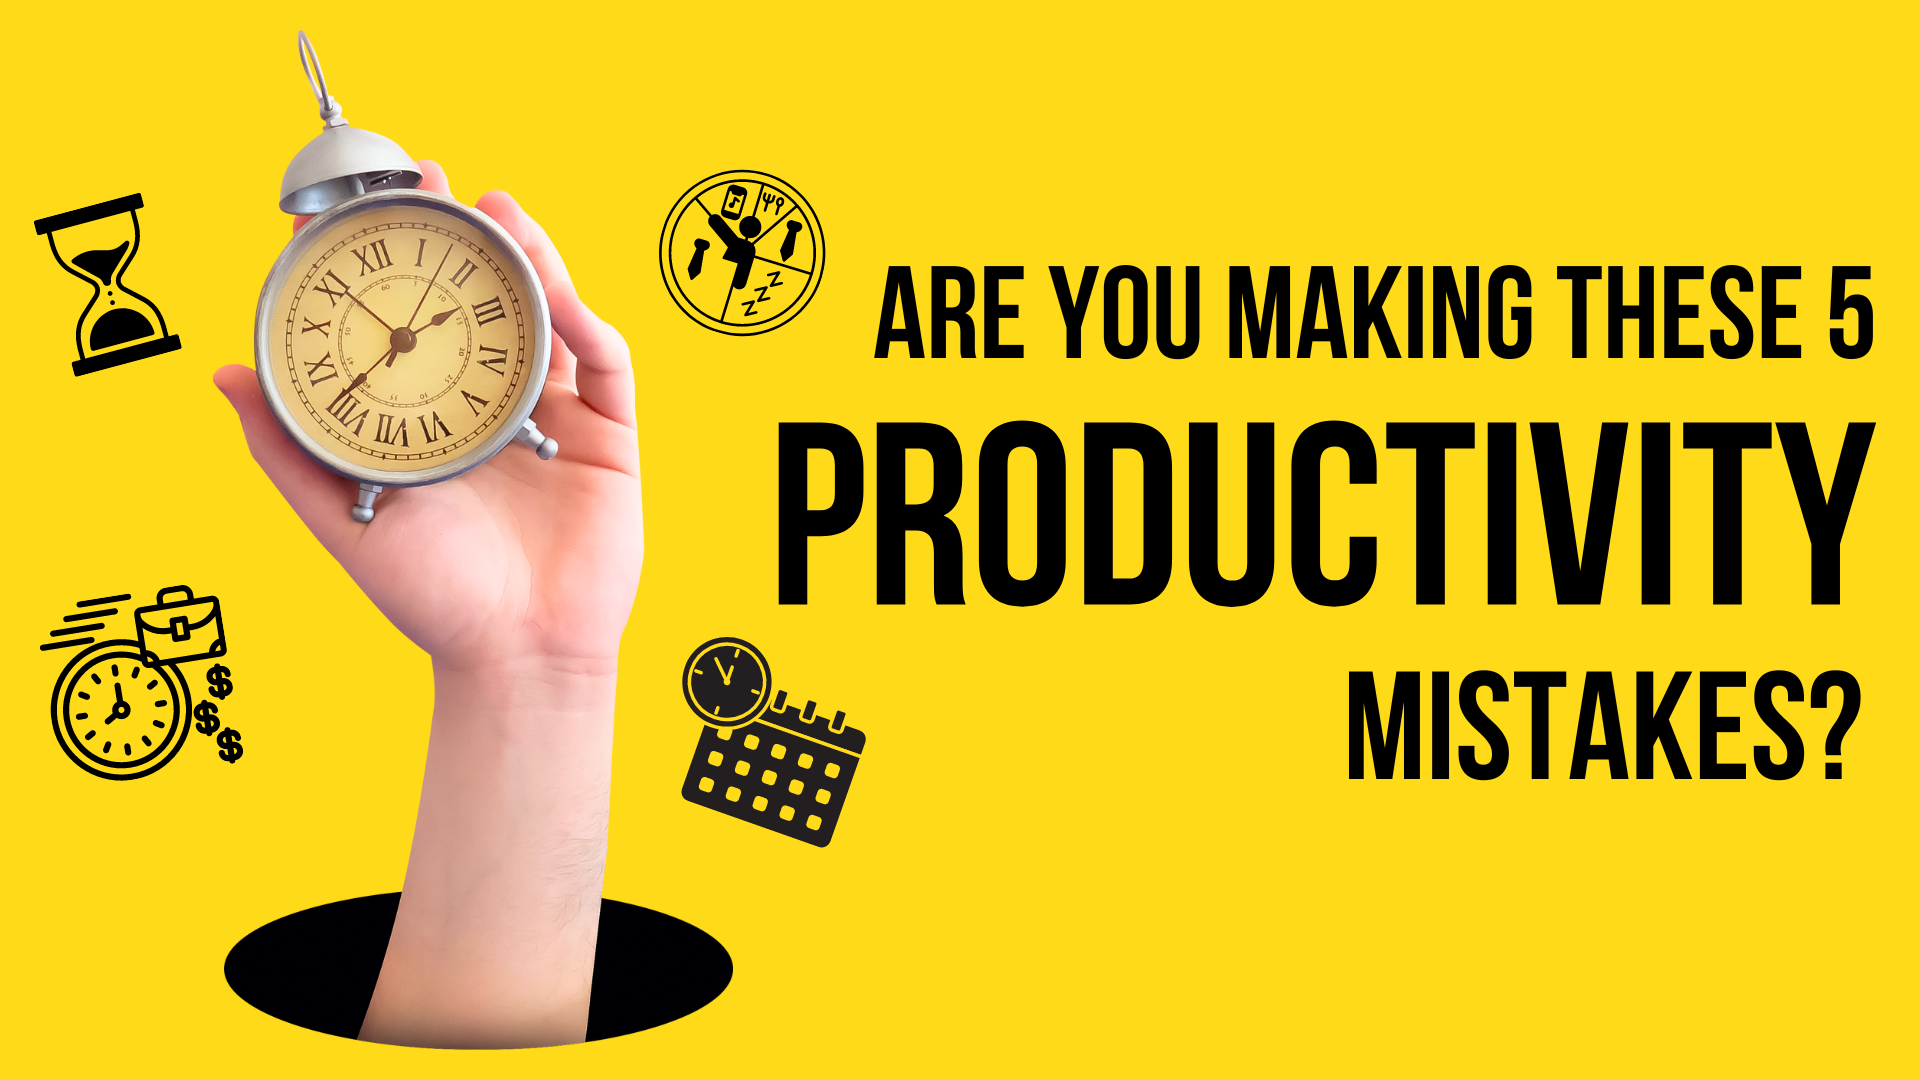 Are You Making These 5 Productivity Mistakes?